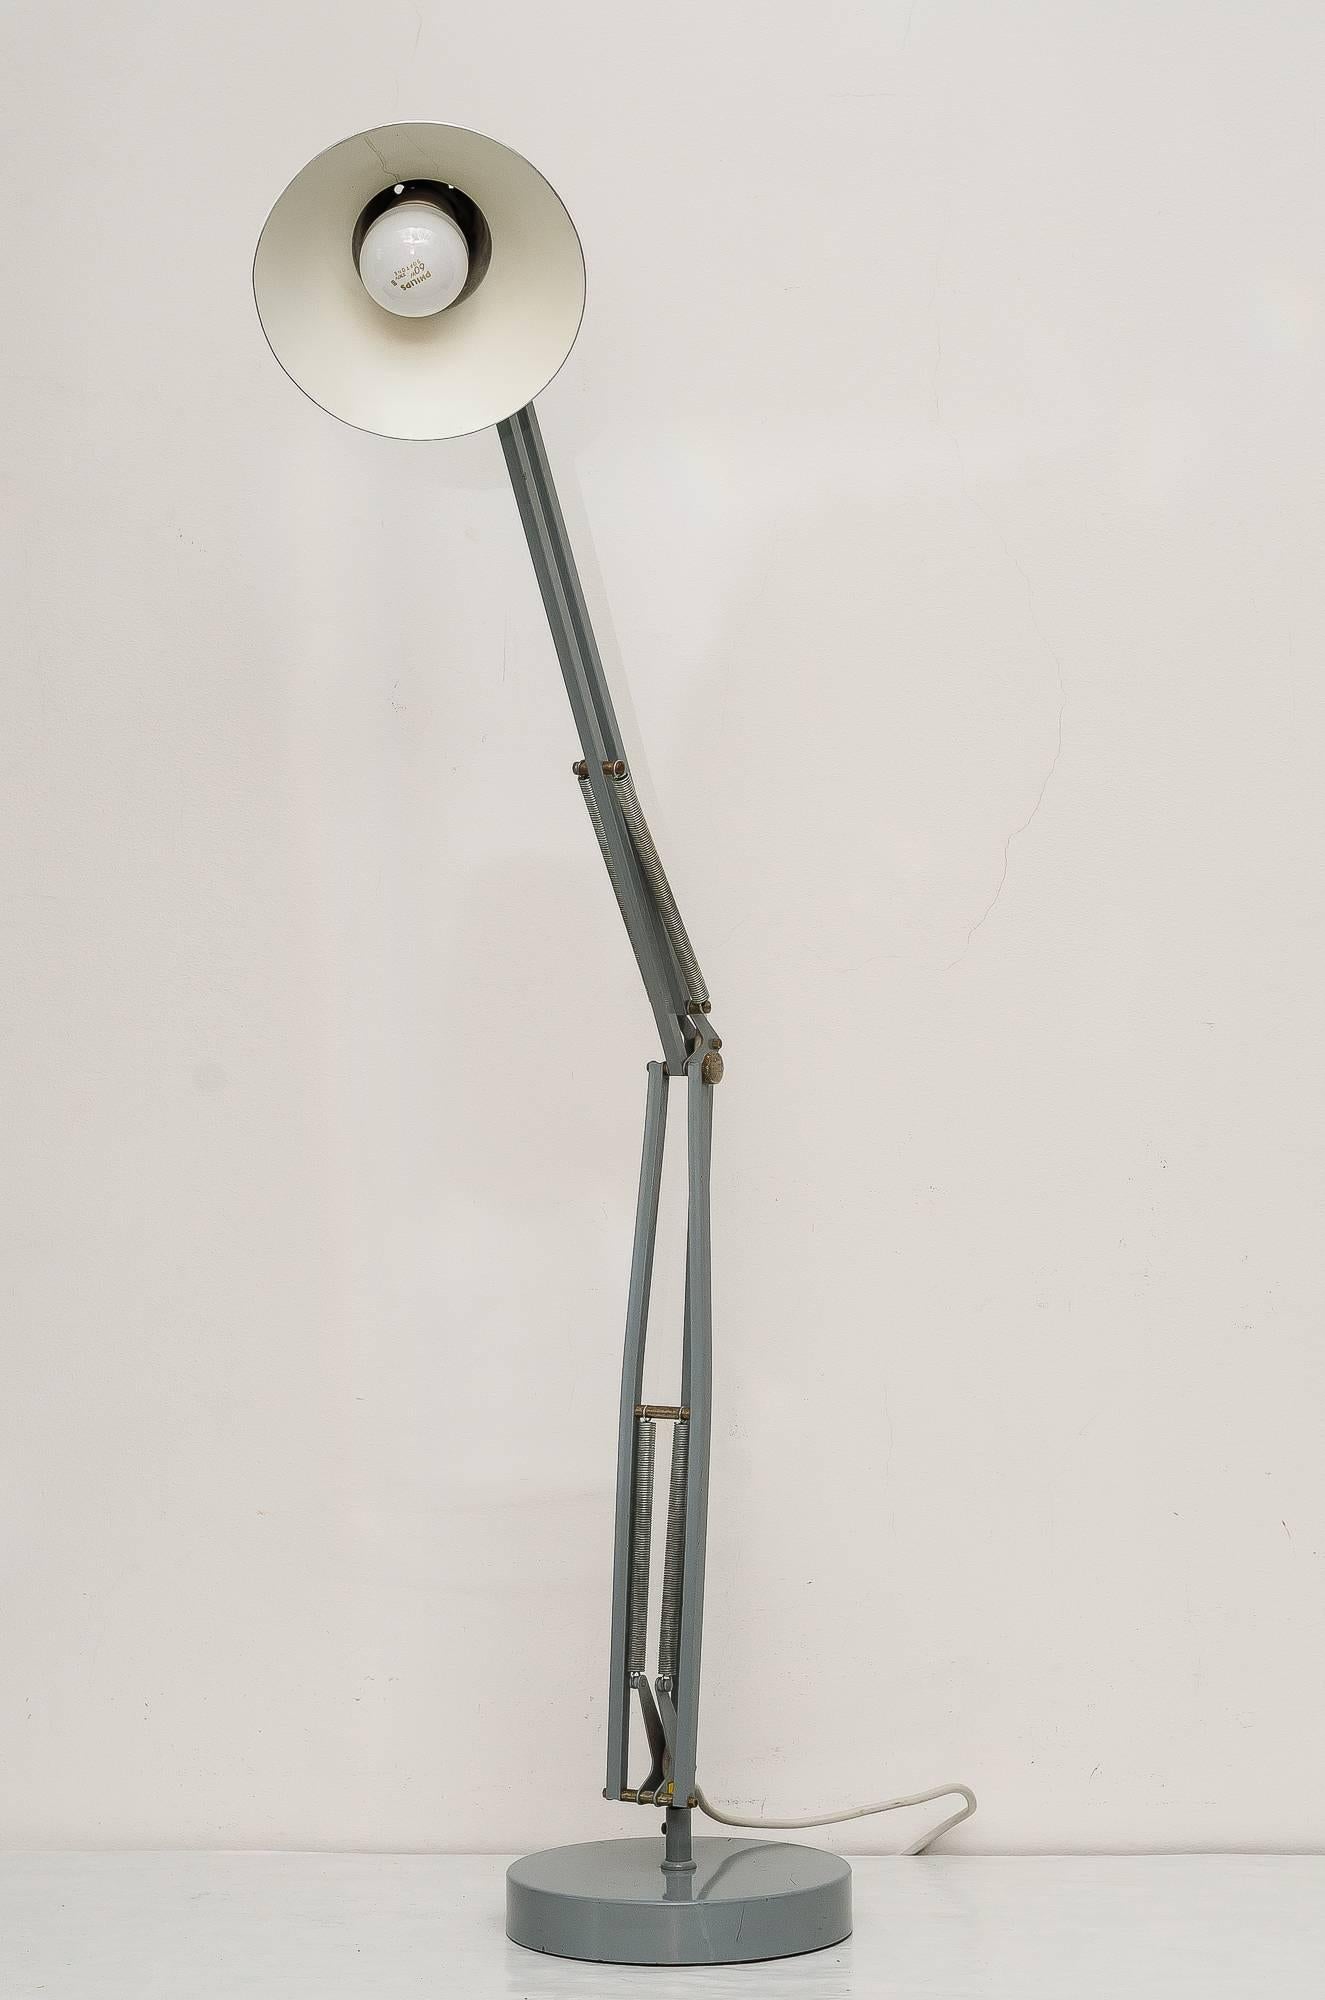 Floor lamp in lacquered metal, swivelling, adjustable by means of spring mechanism in all directions, heavy cast metal base, company etiquette
Original condition.